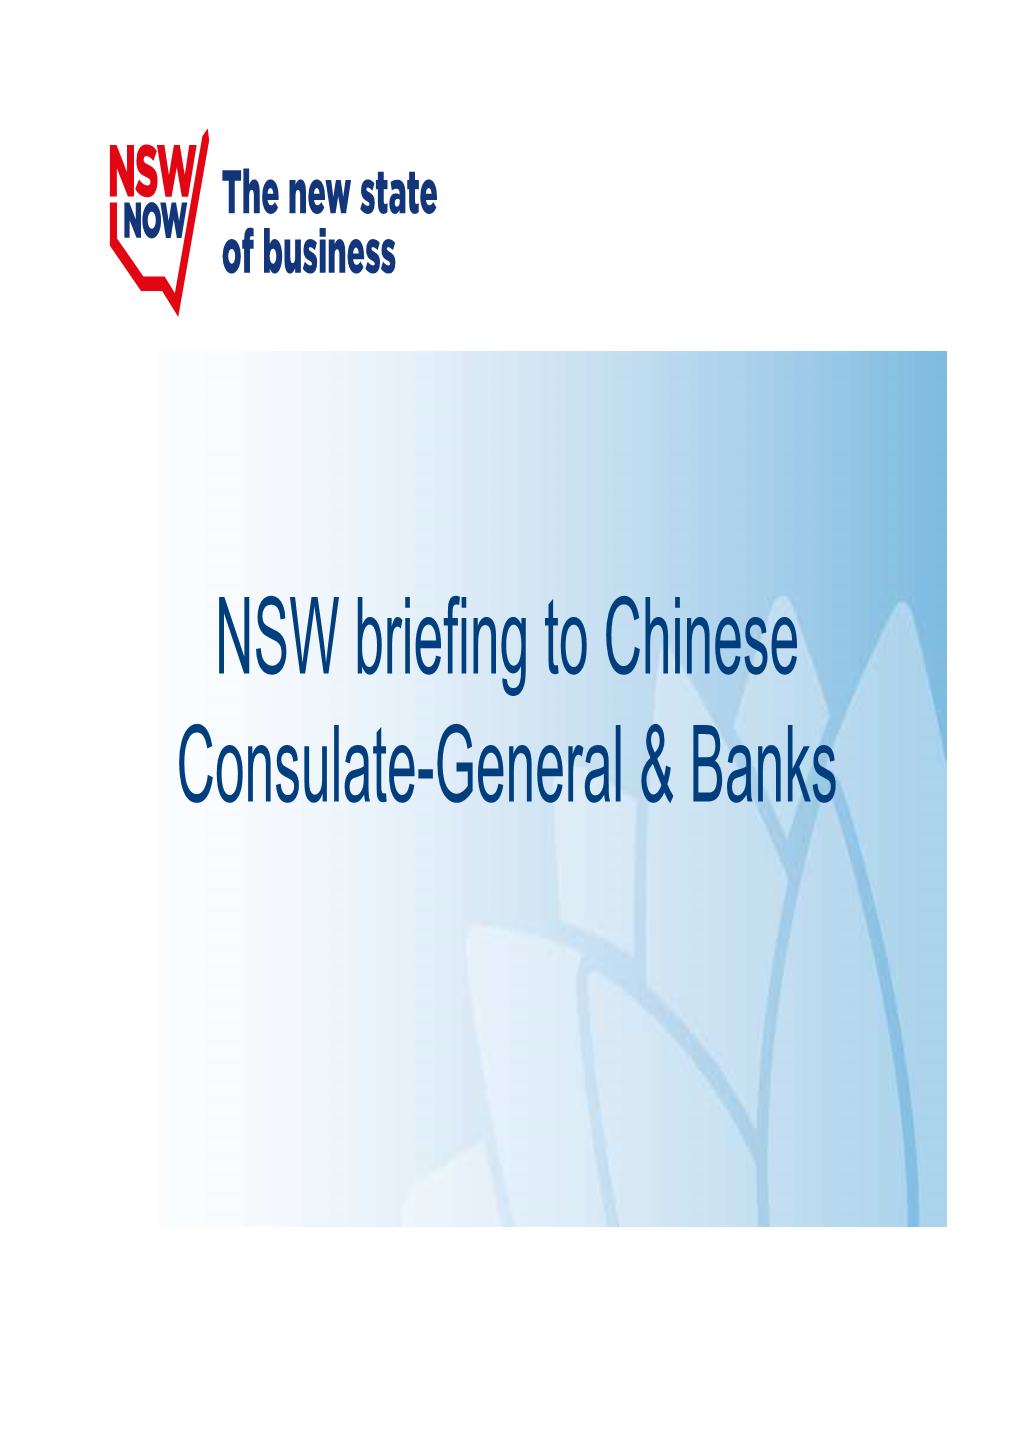 NSW Briefing to Chinese Consulate-General & Banks